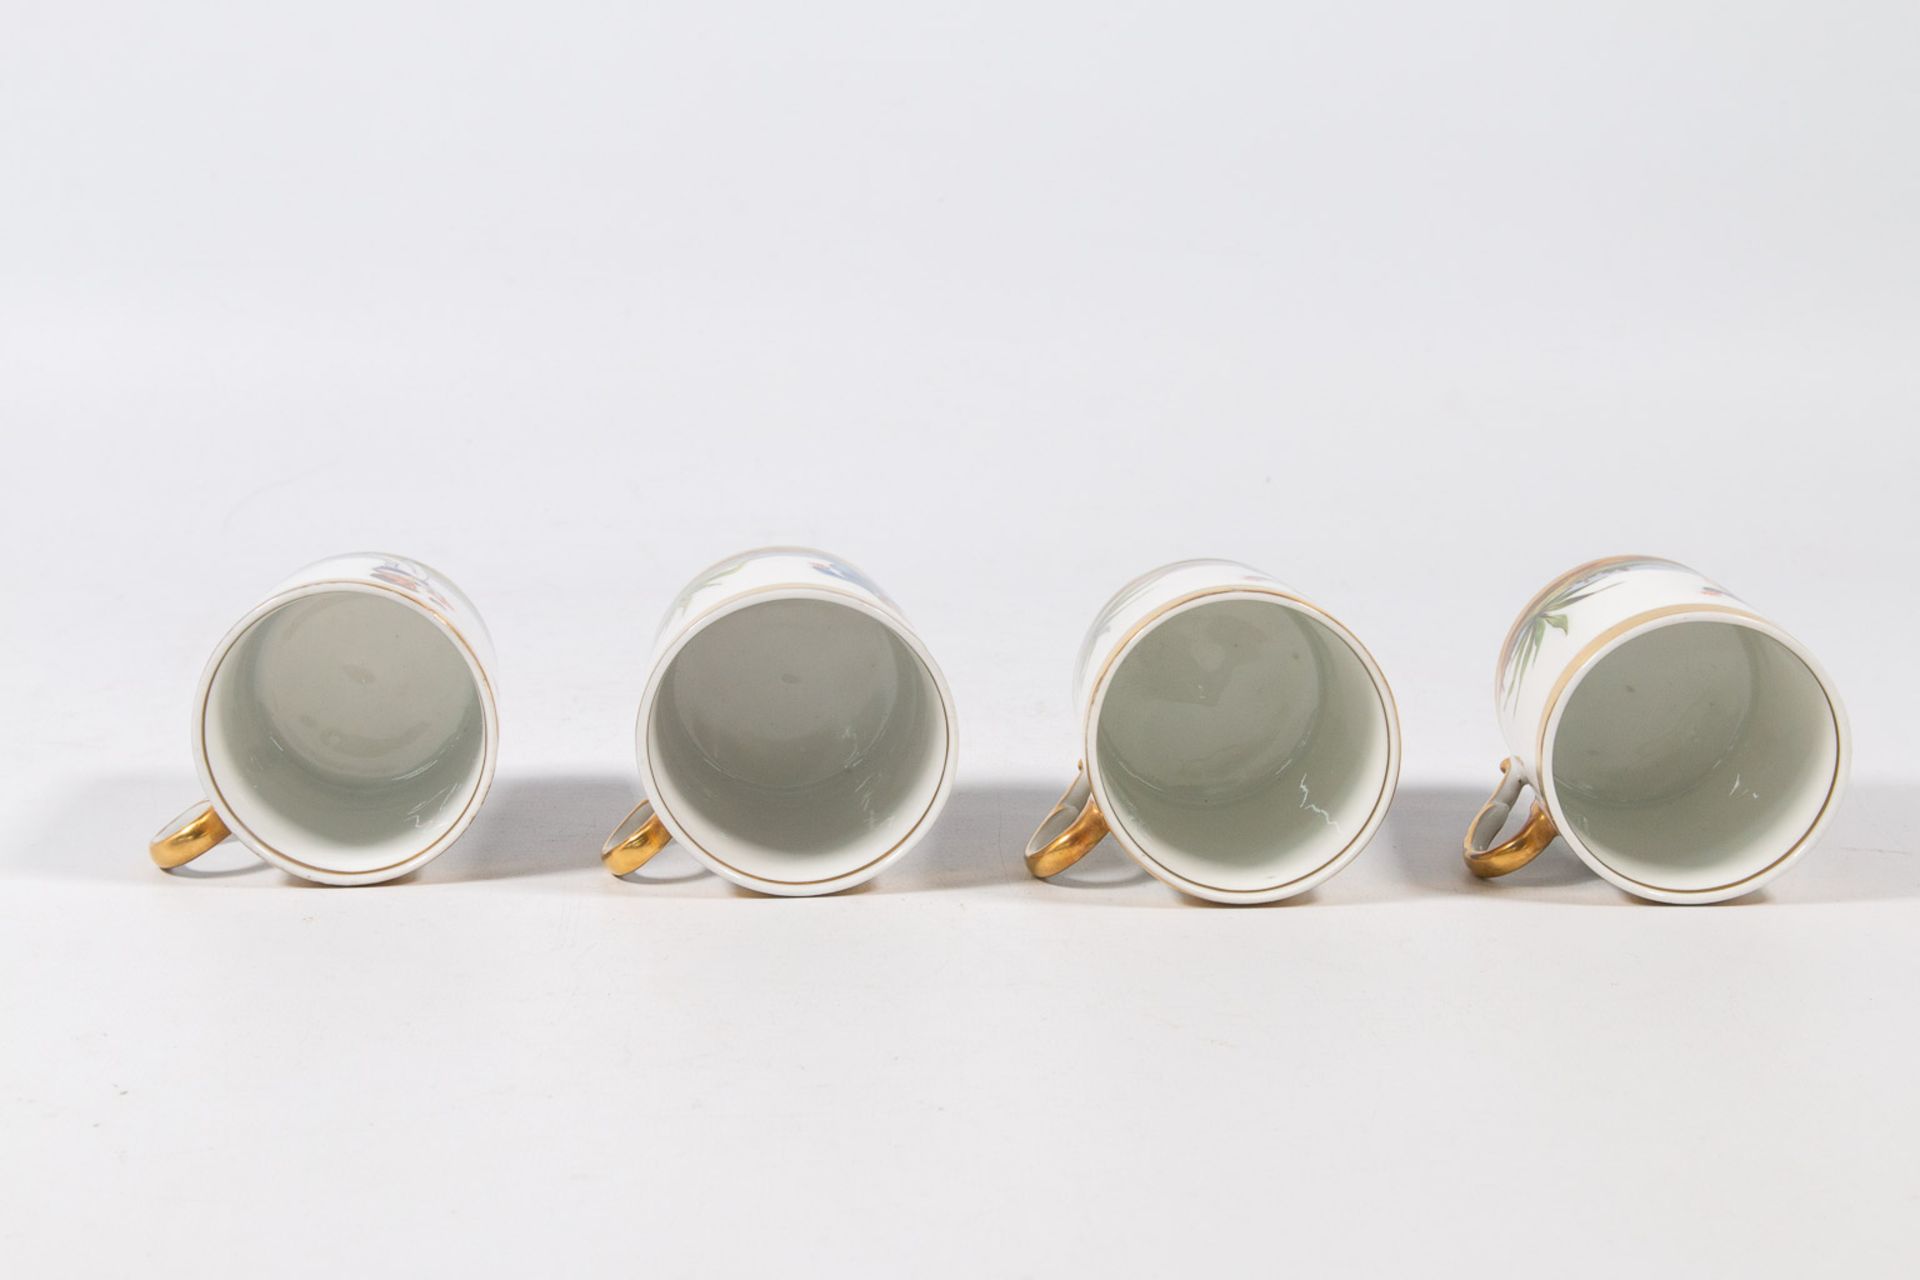 A Complete 'Vieux Bruxelles' coffee and tea service made of porcelain. - Image 10 of 53